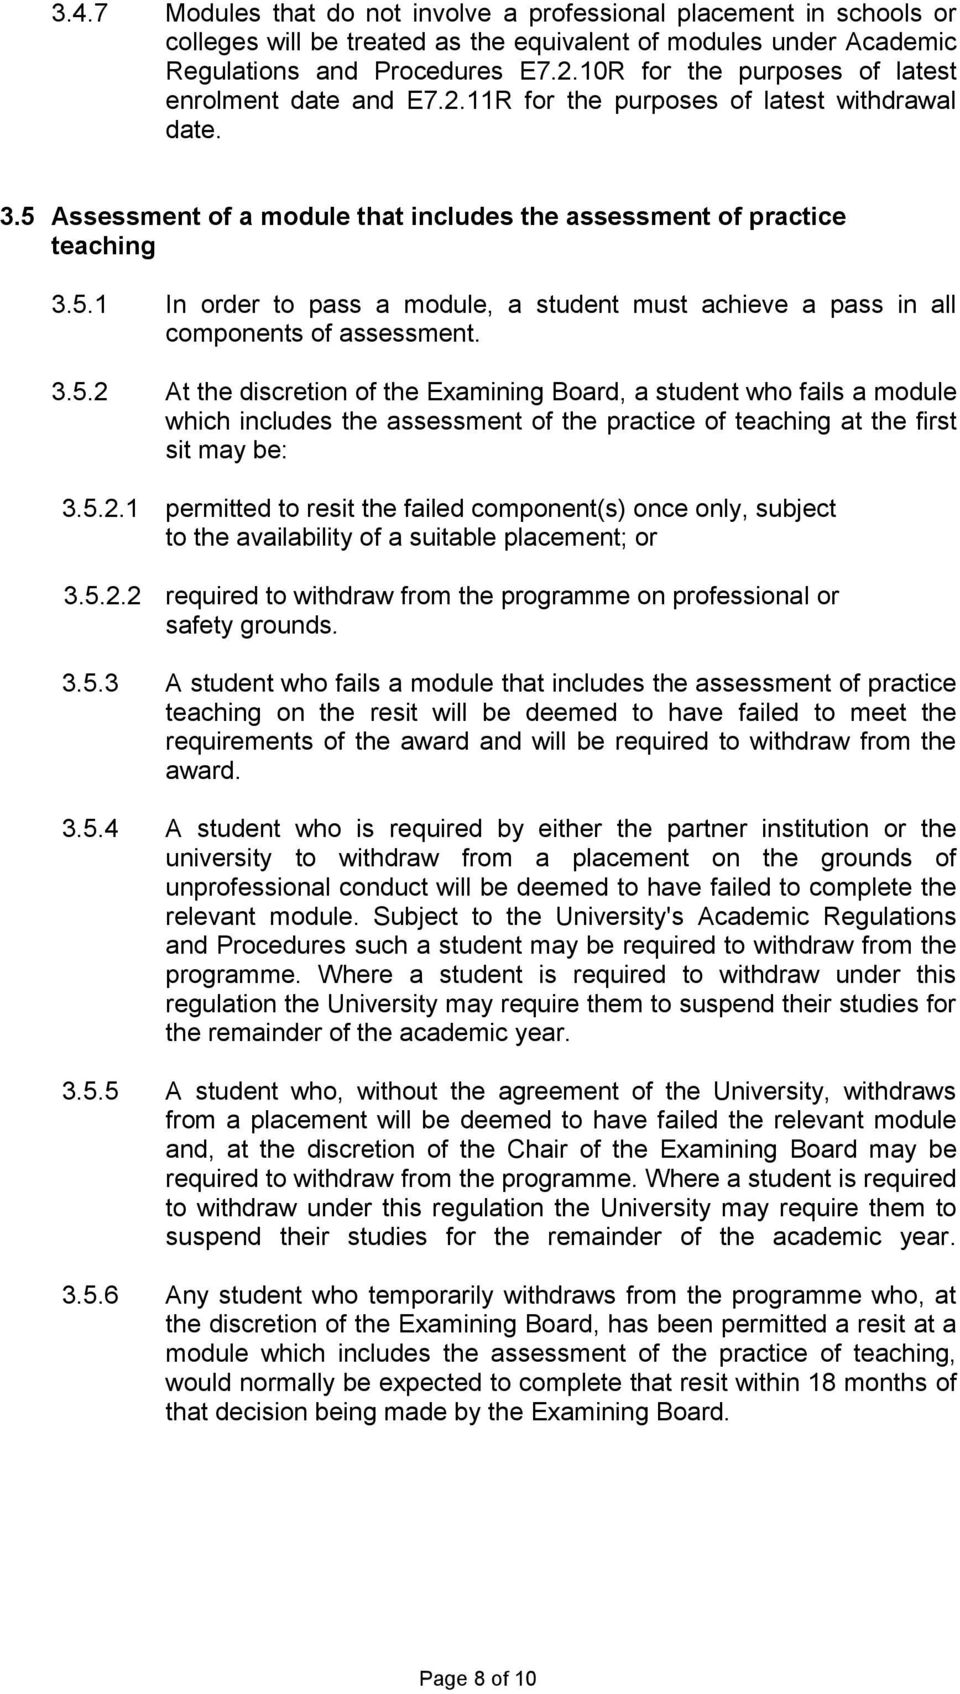 3.5.2 At the discretion of the Examining Board, a student who fails a module which includes the assessment of the practice of teaching at the first sit may be: 3.5.2.1 permitted to resit the failed component(s) once only, subject to the availability of a suitable placement; or 3.